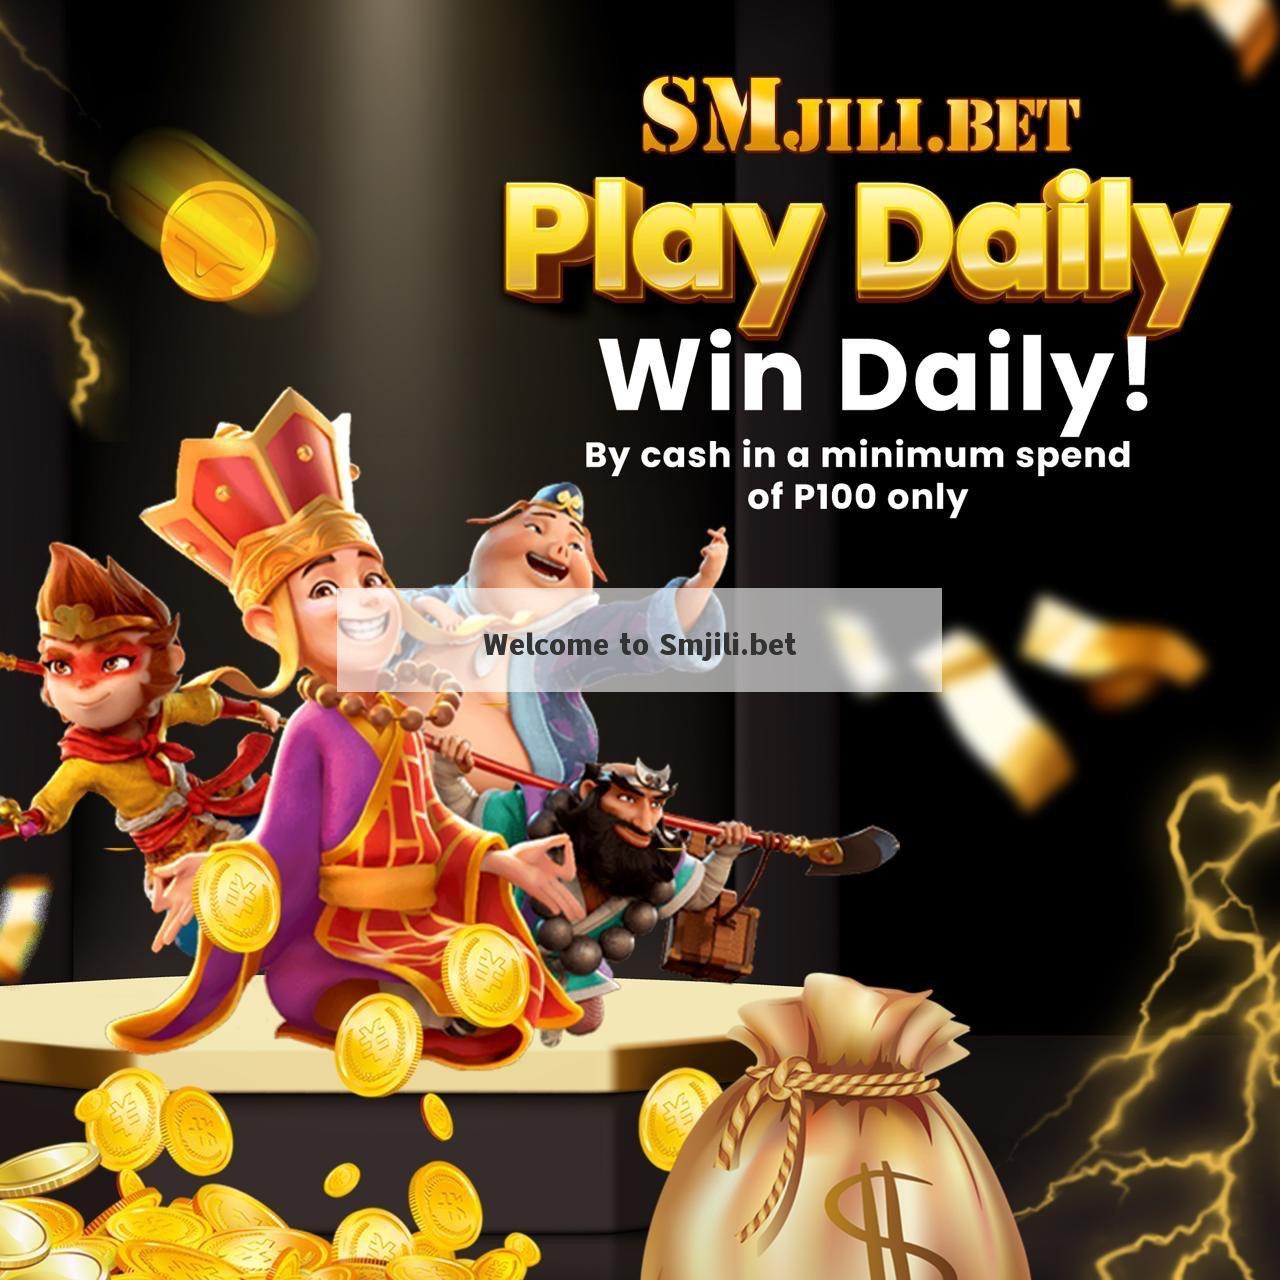 shazamcasino100nodepositbonuscodes2021| Moutai prices fall, multiple attributes are difficult to replace